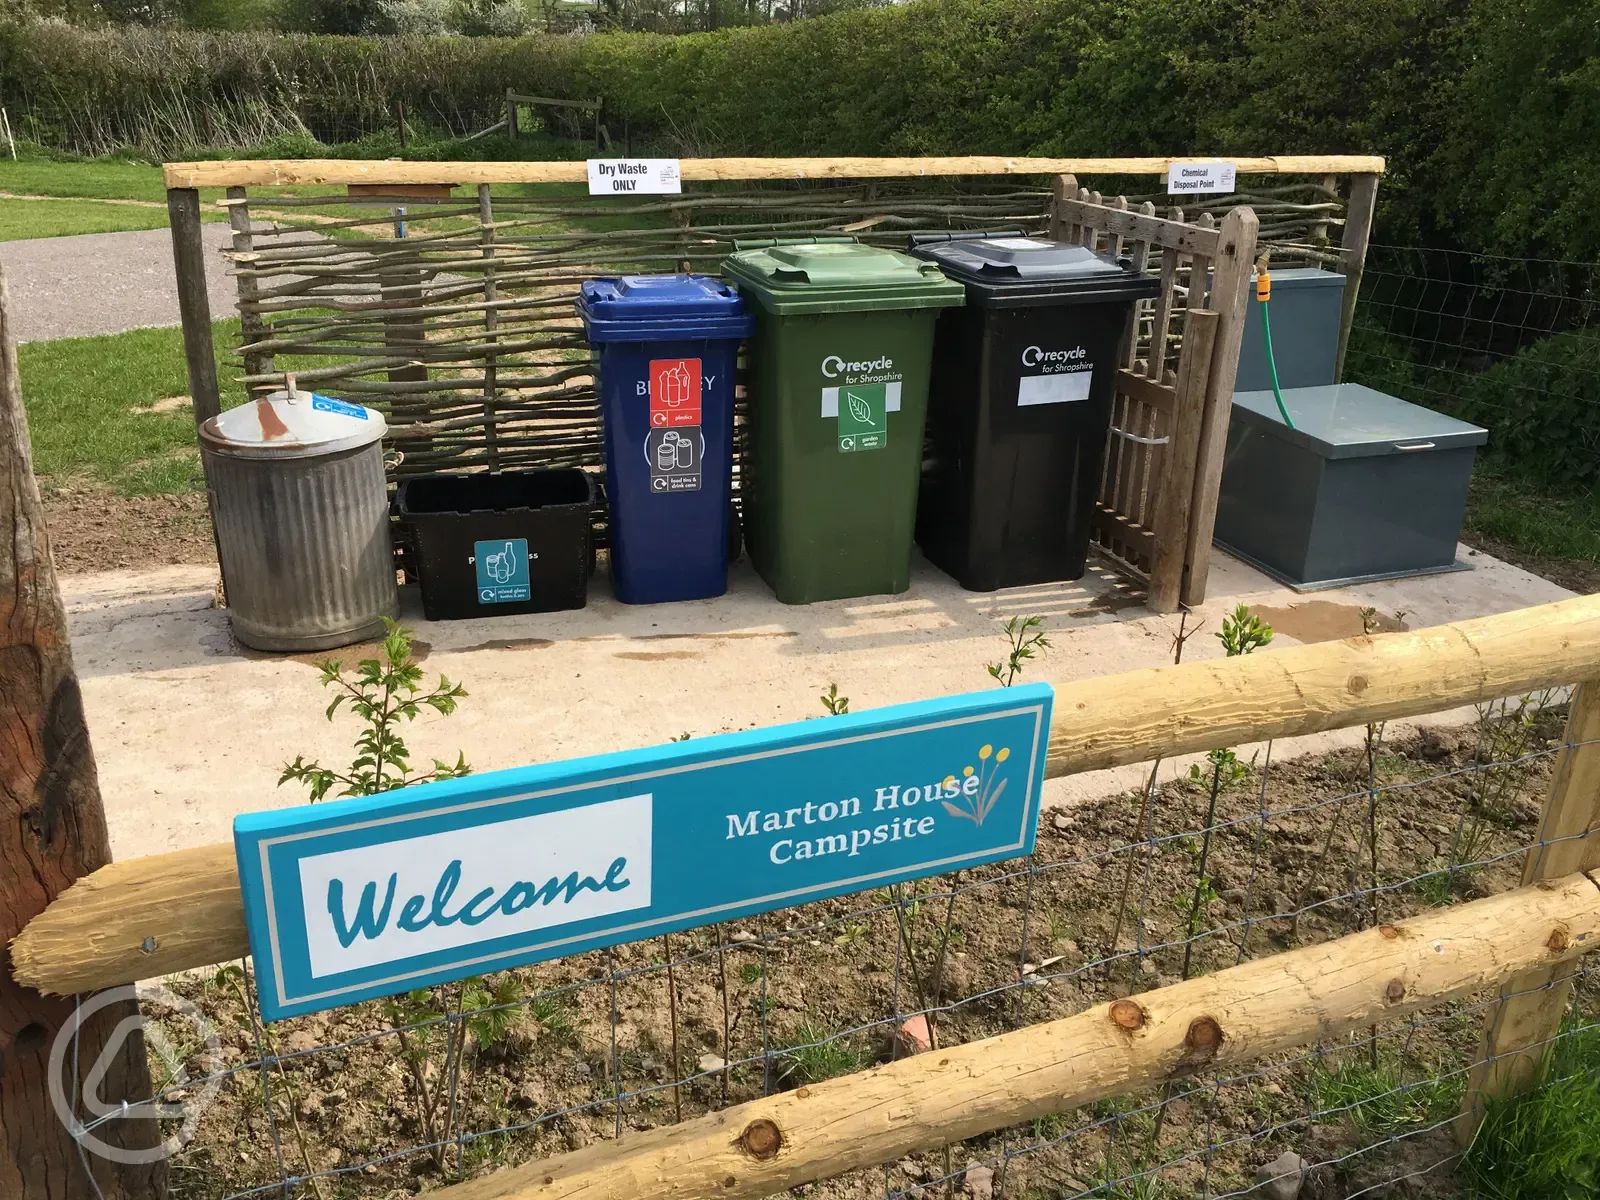 Clean and tidy service area. Flushable Elsan point